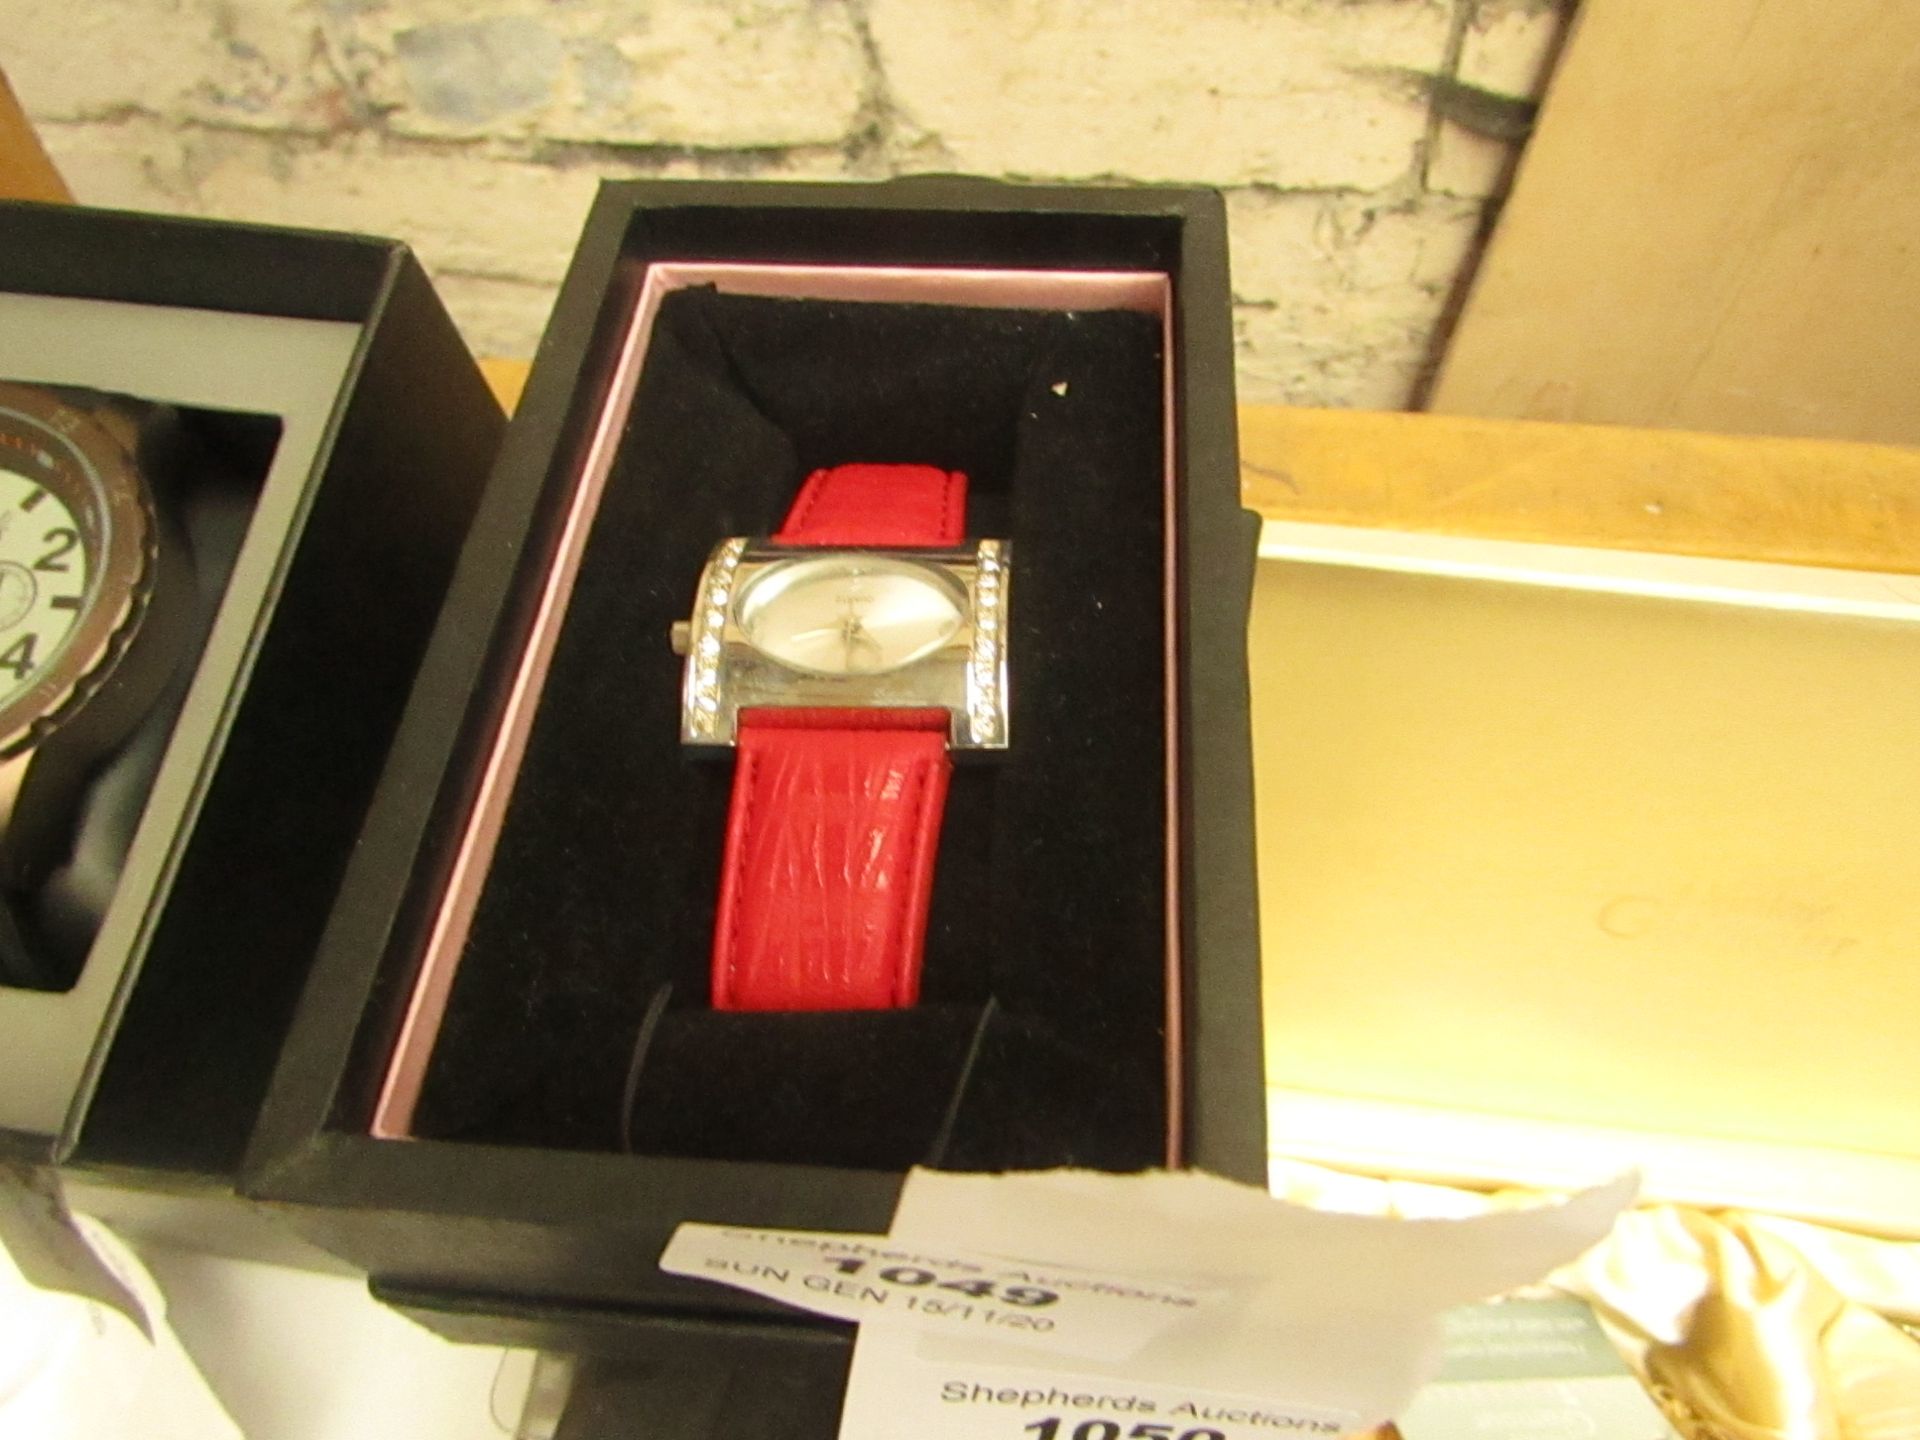 RJM Ladies red strapped watch, in presentation box, unchecked for working condition but looks